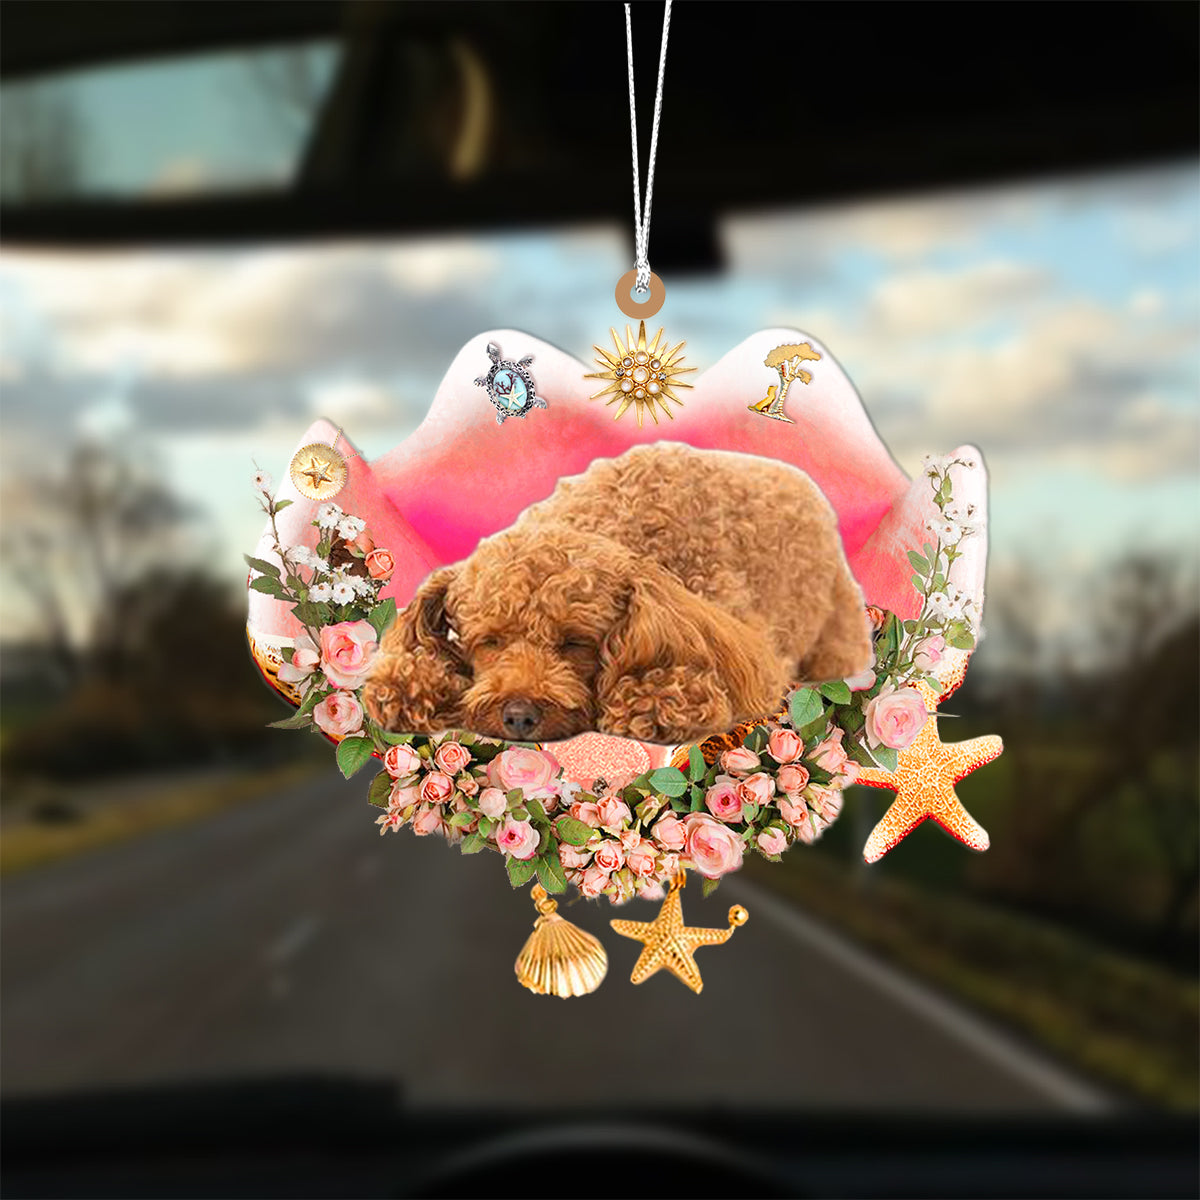 Poodle2 Sleeping In The Seashell Ornament